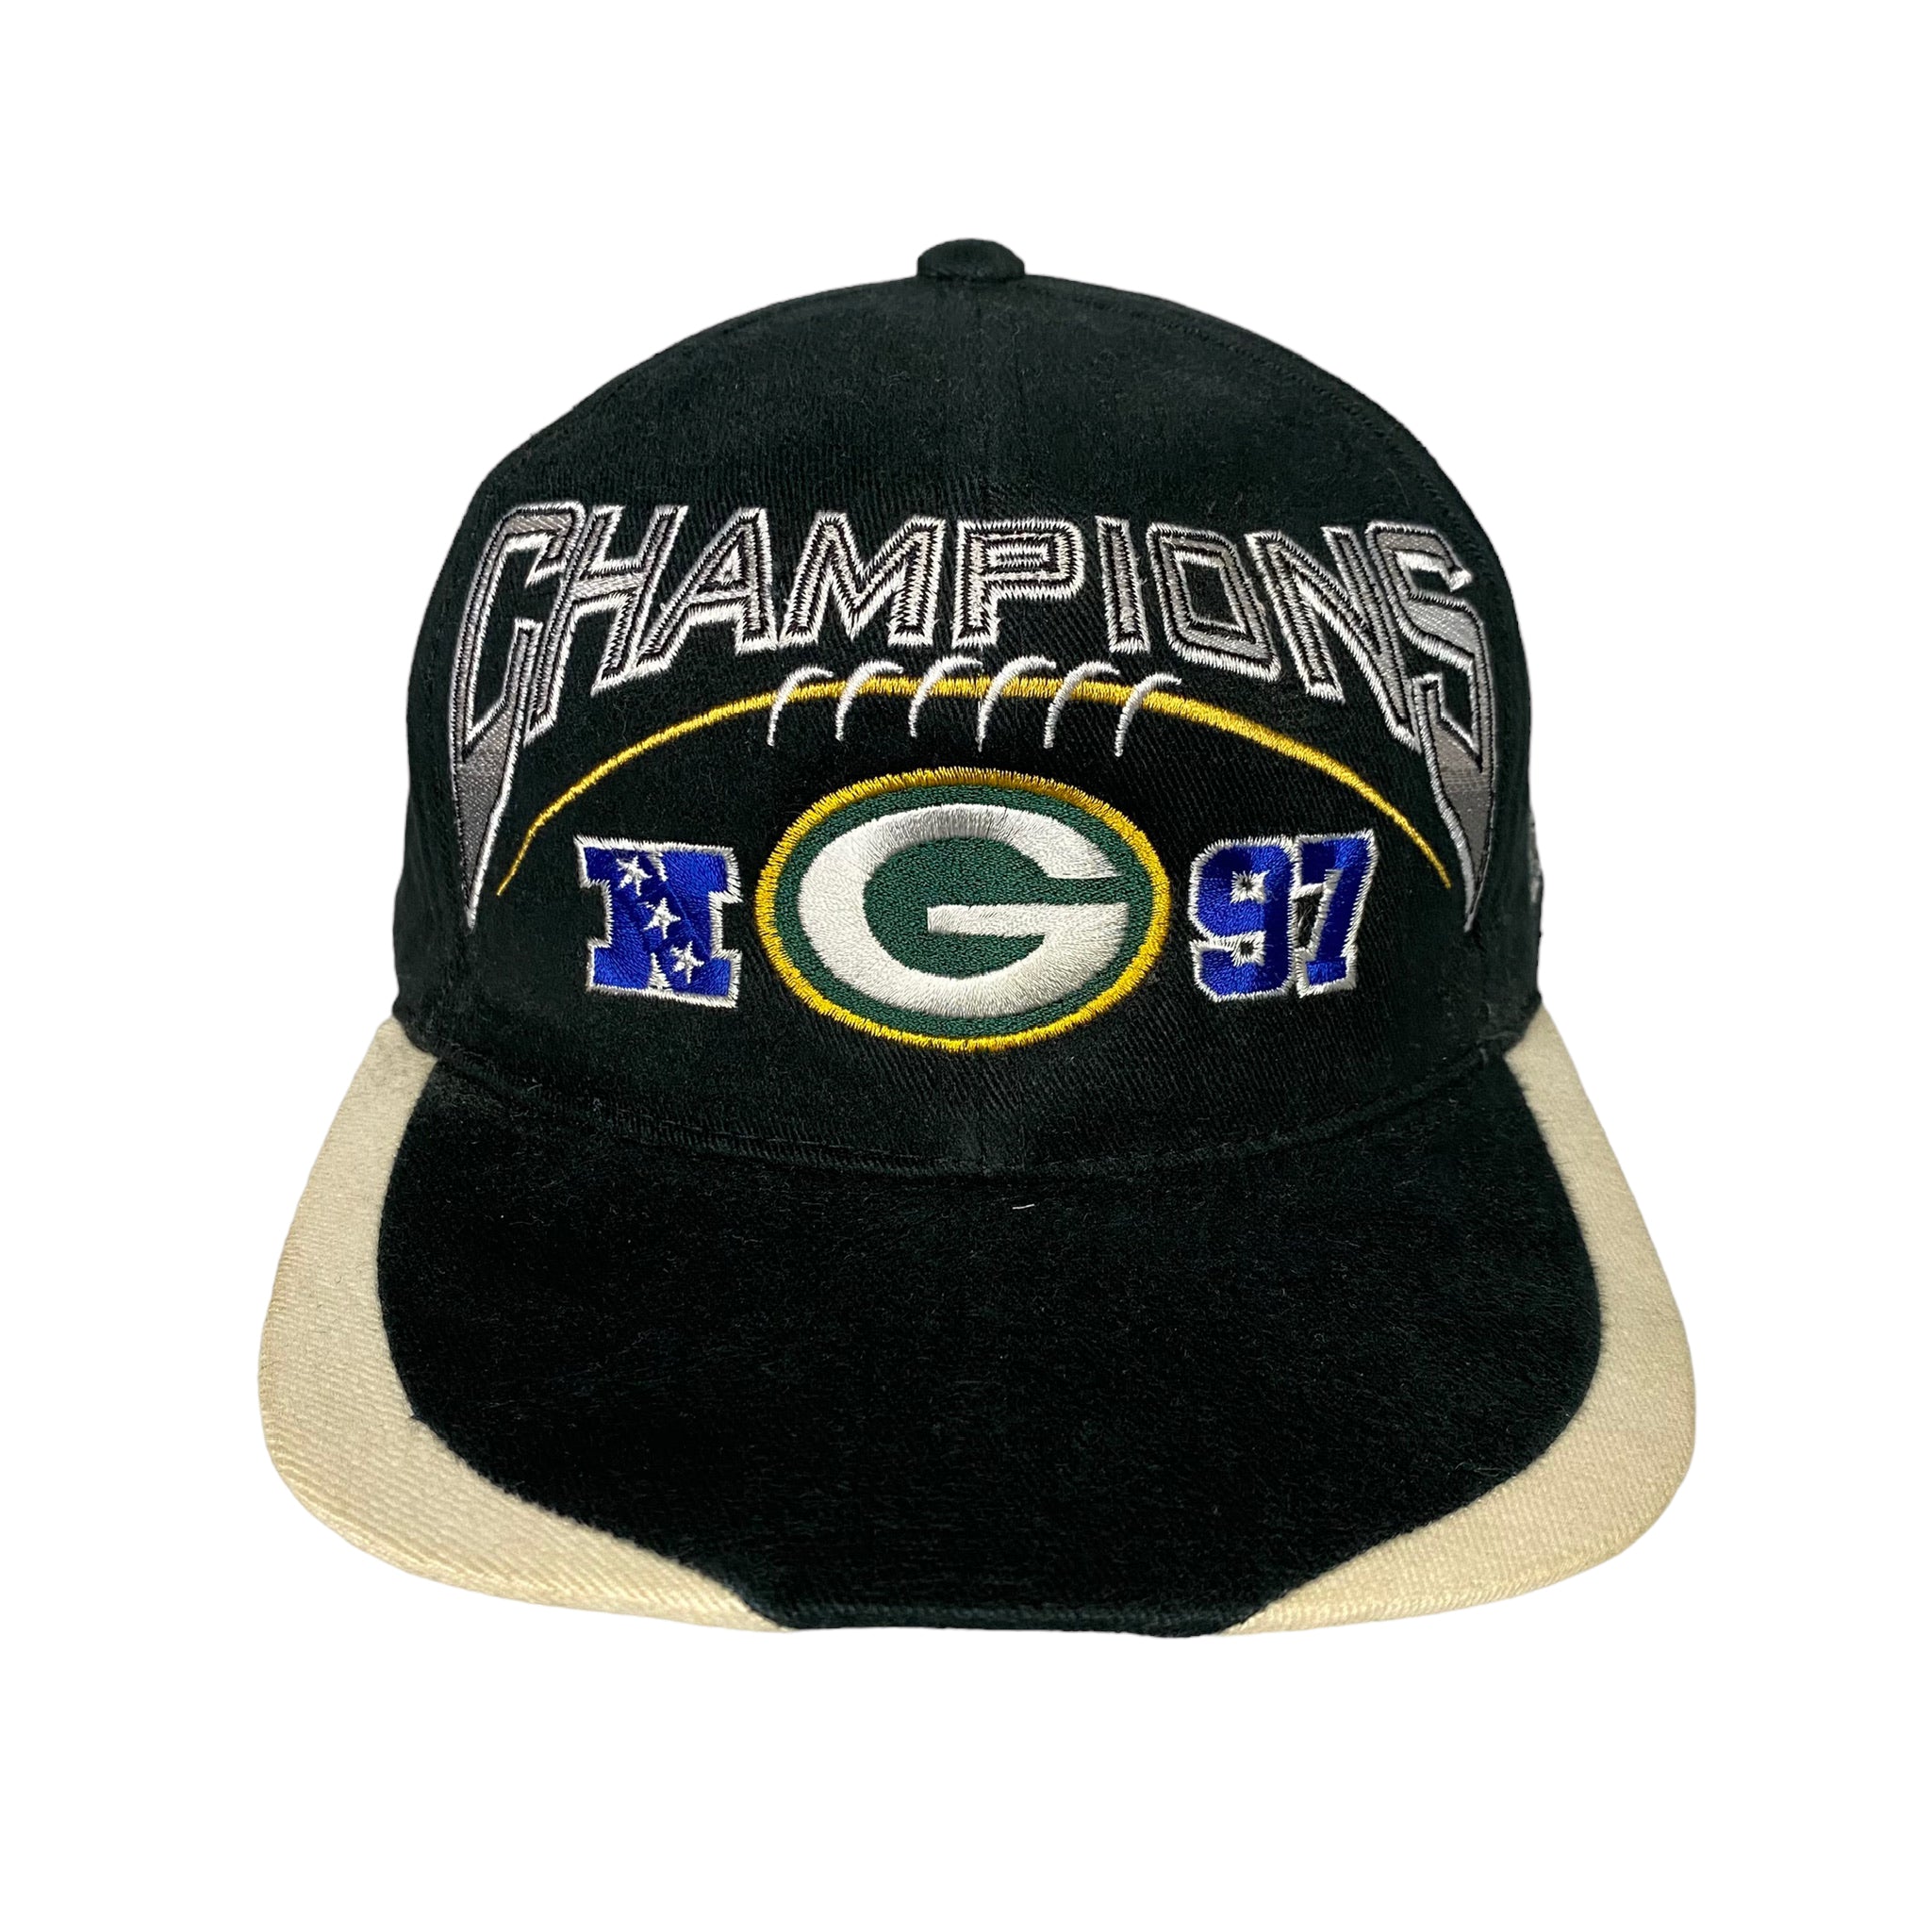 Vintage Green Bay Packers NFC Champs SnapBack